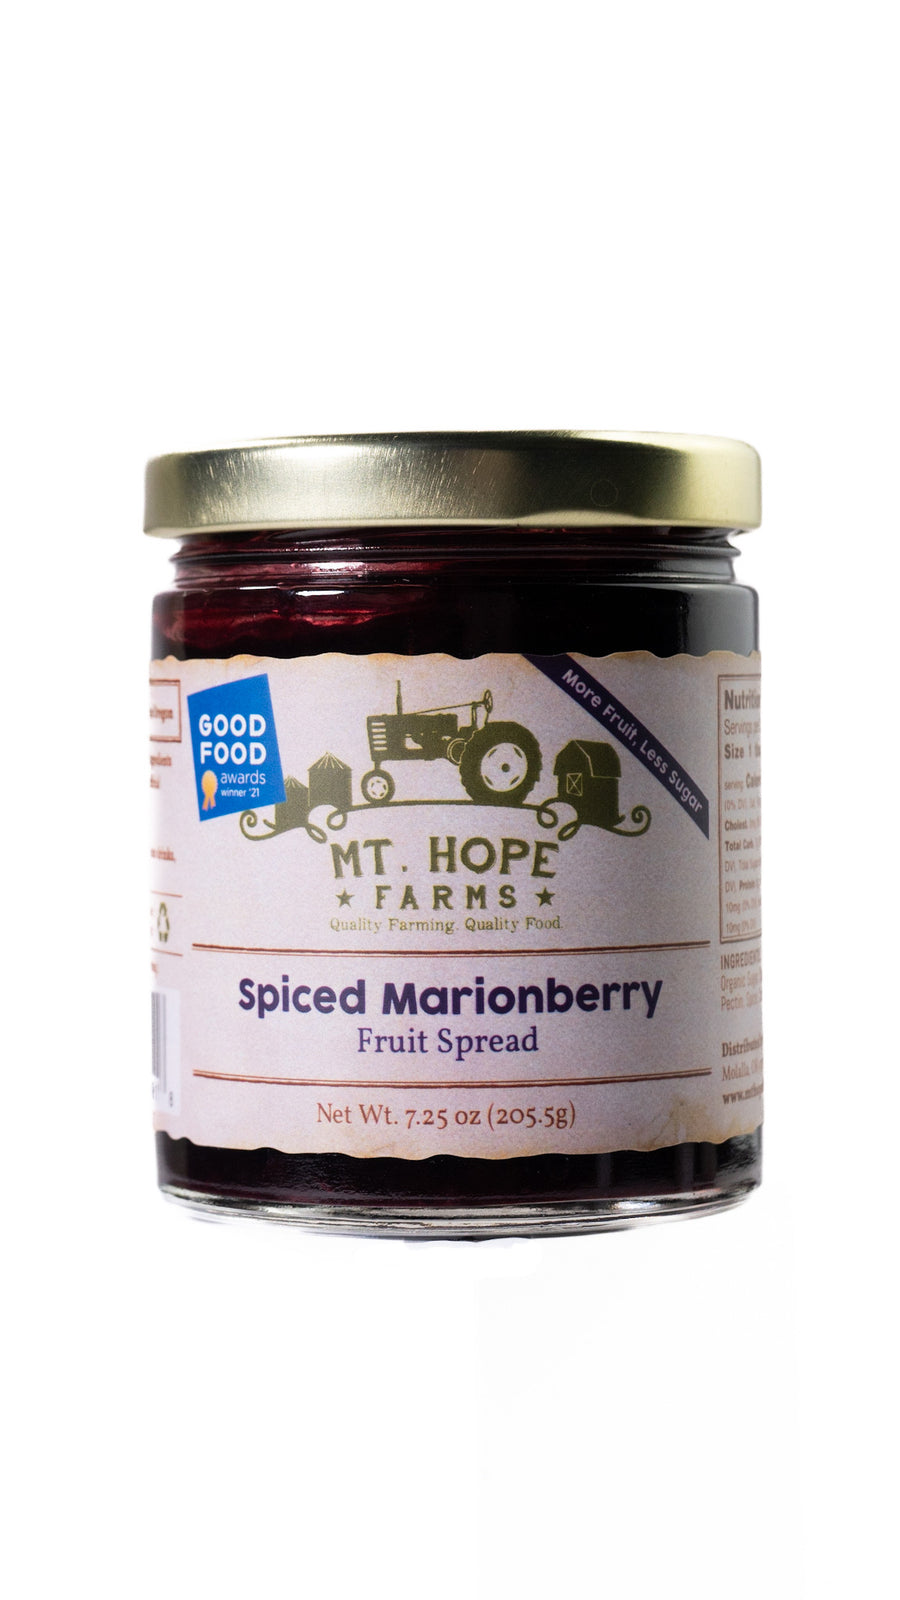 Spiced Marionberry Fruit Spread by Mt. Hope Farms